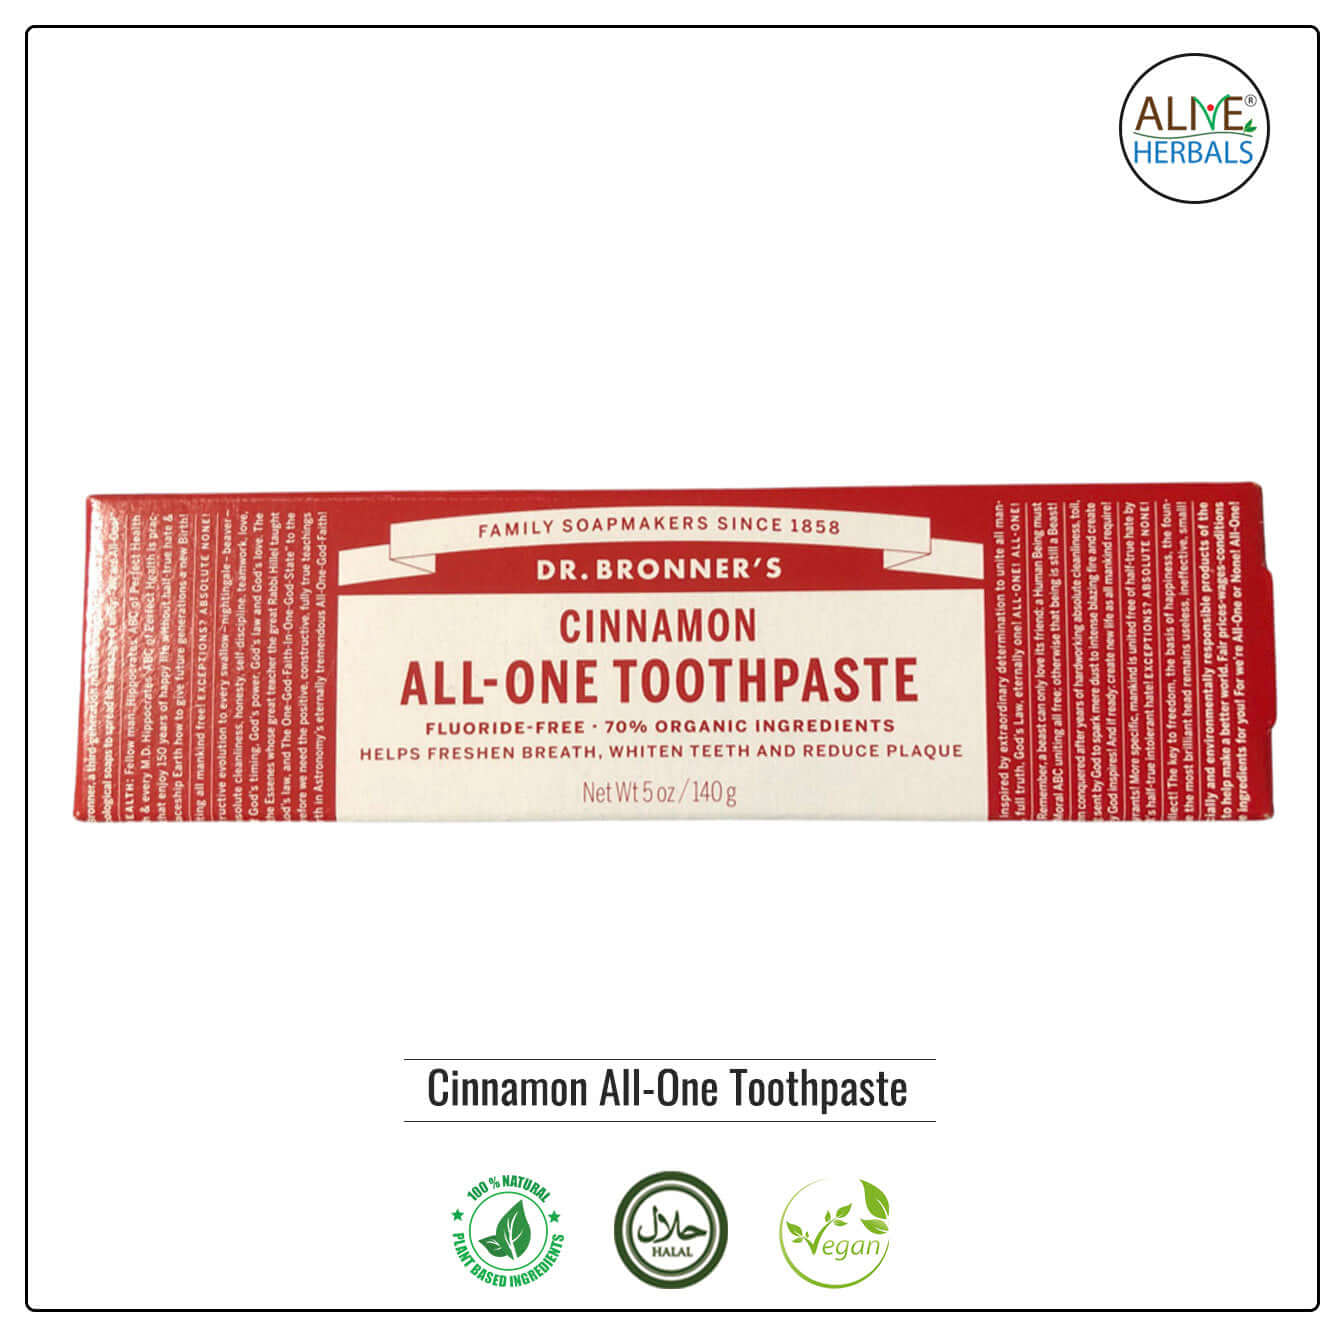 Cinnamon All-One Toothpaste - Buy at Natural Food Store | Alive Herbals.